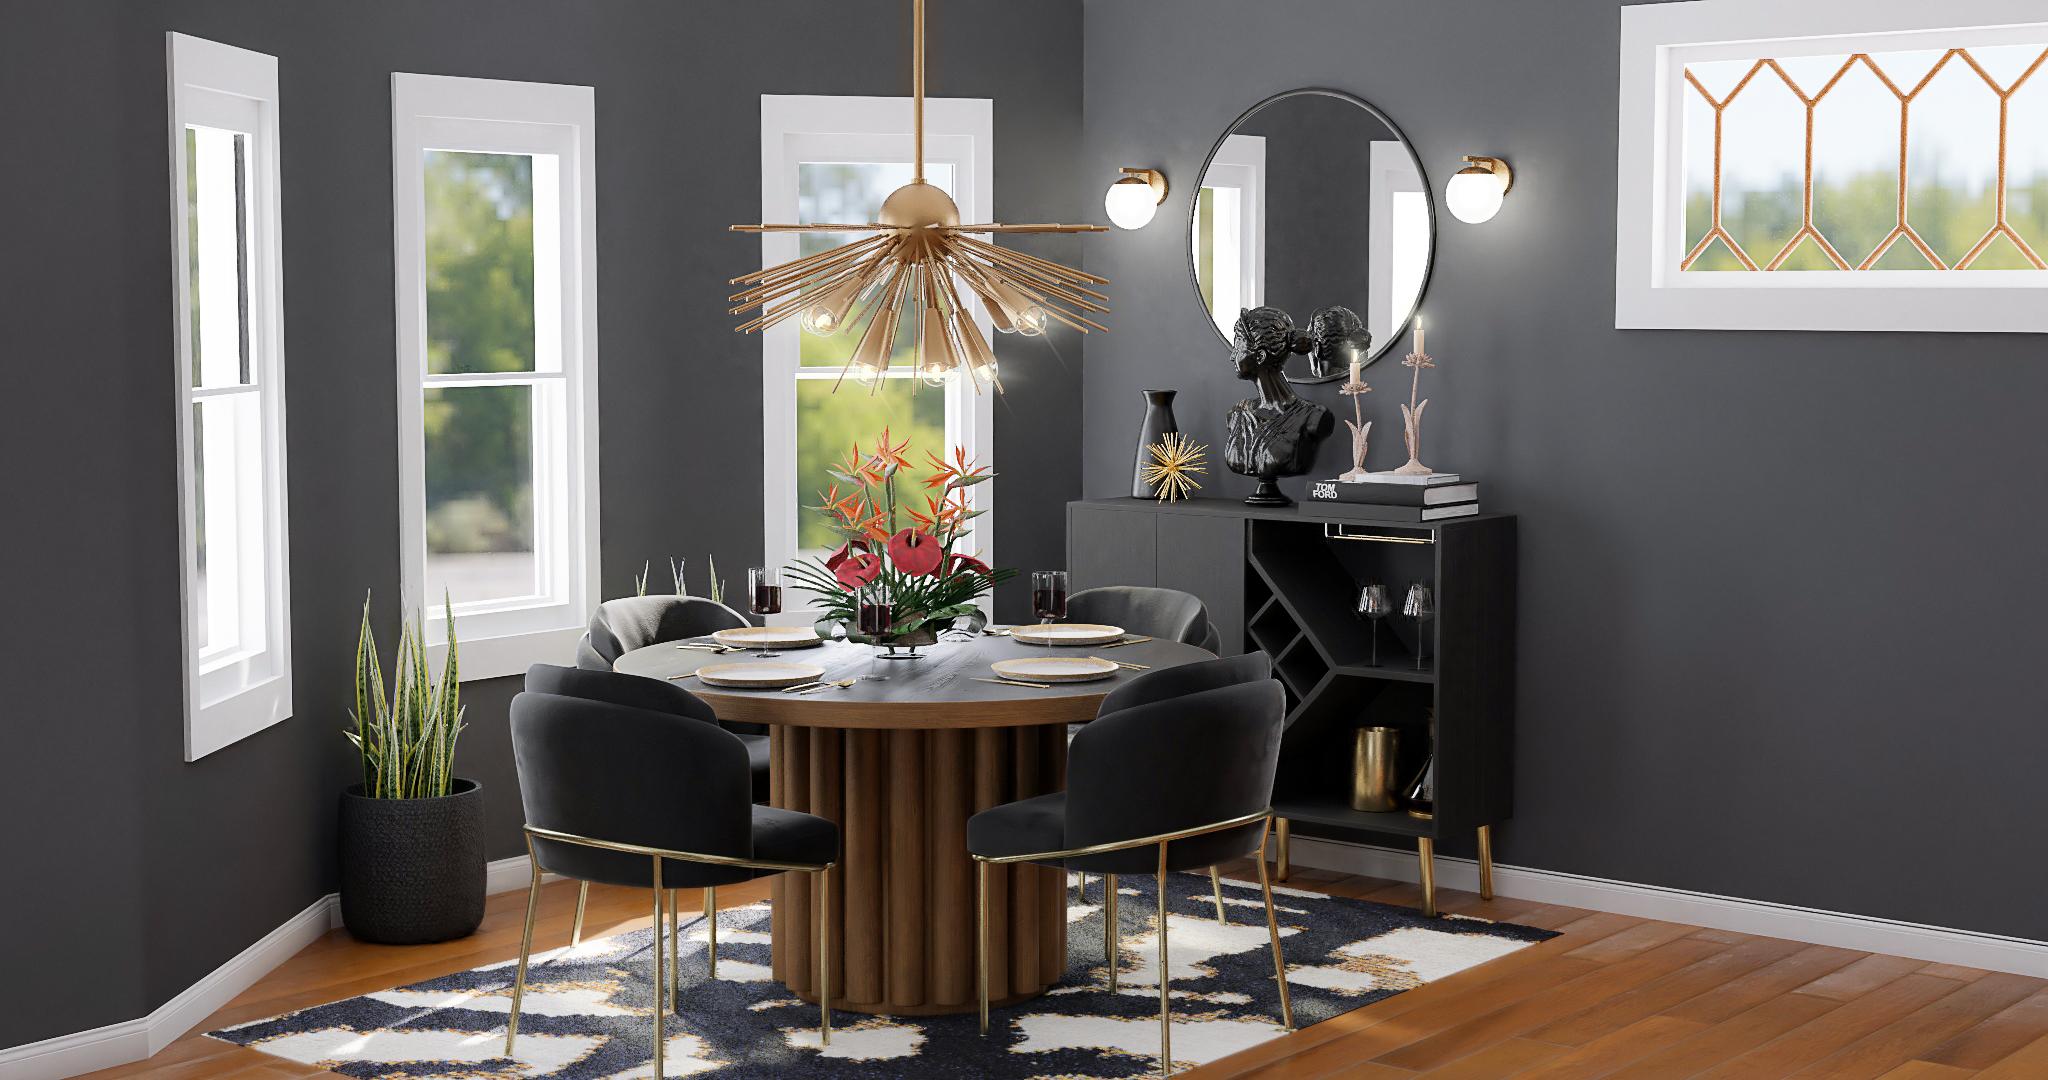 A Gatsby Inspired Art Deco Dining Room